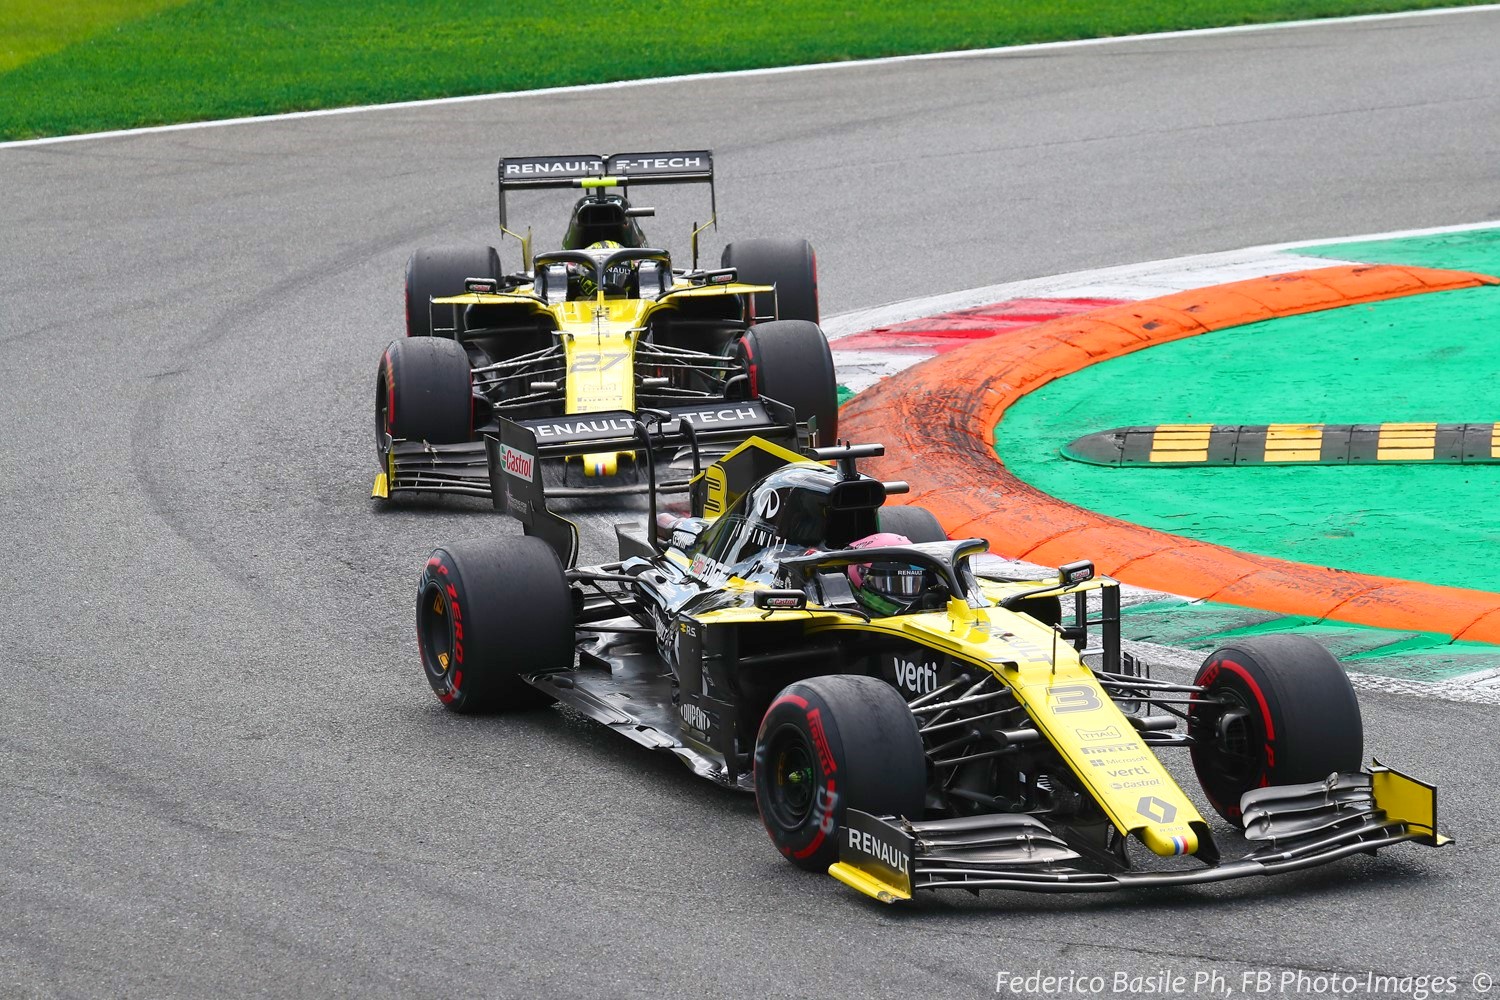 The Renaults at Monza Sunday